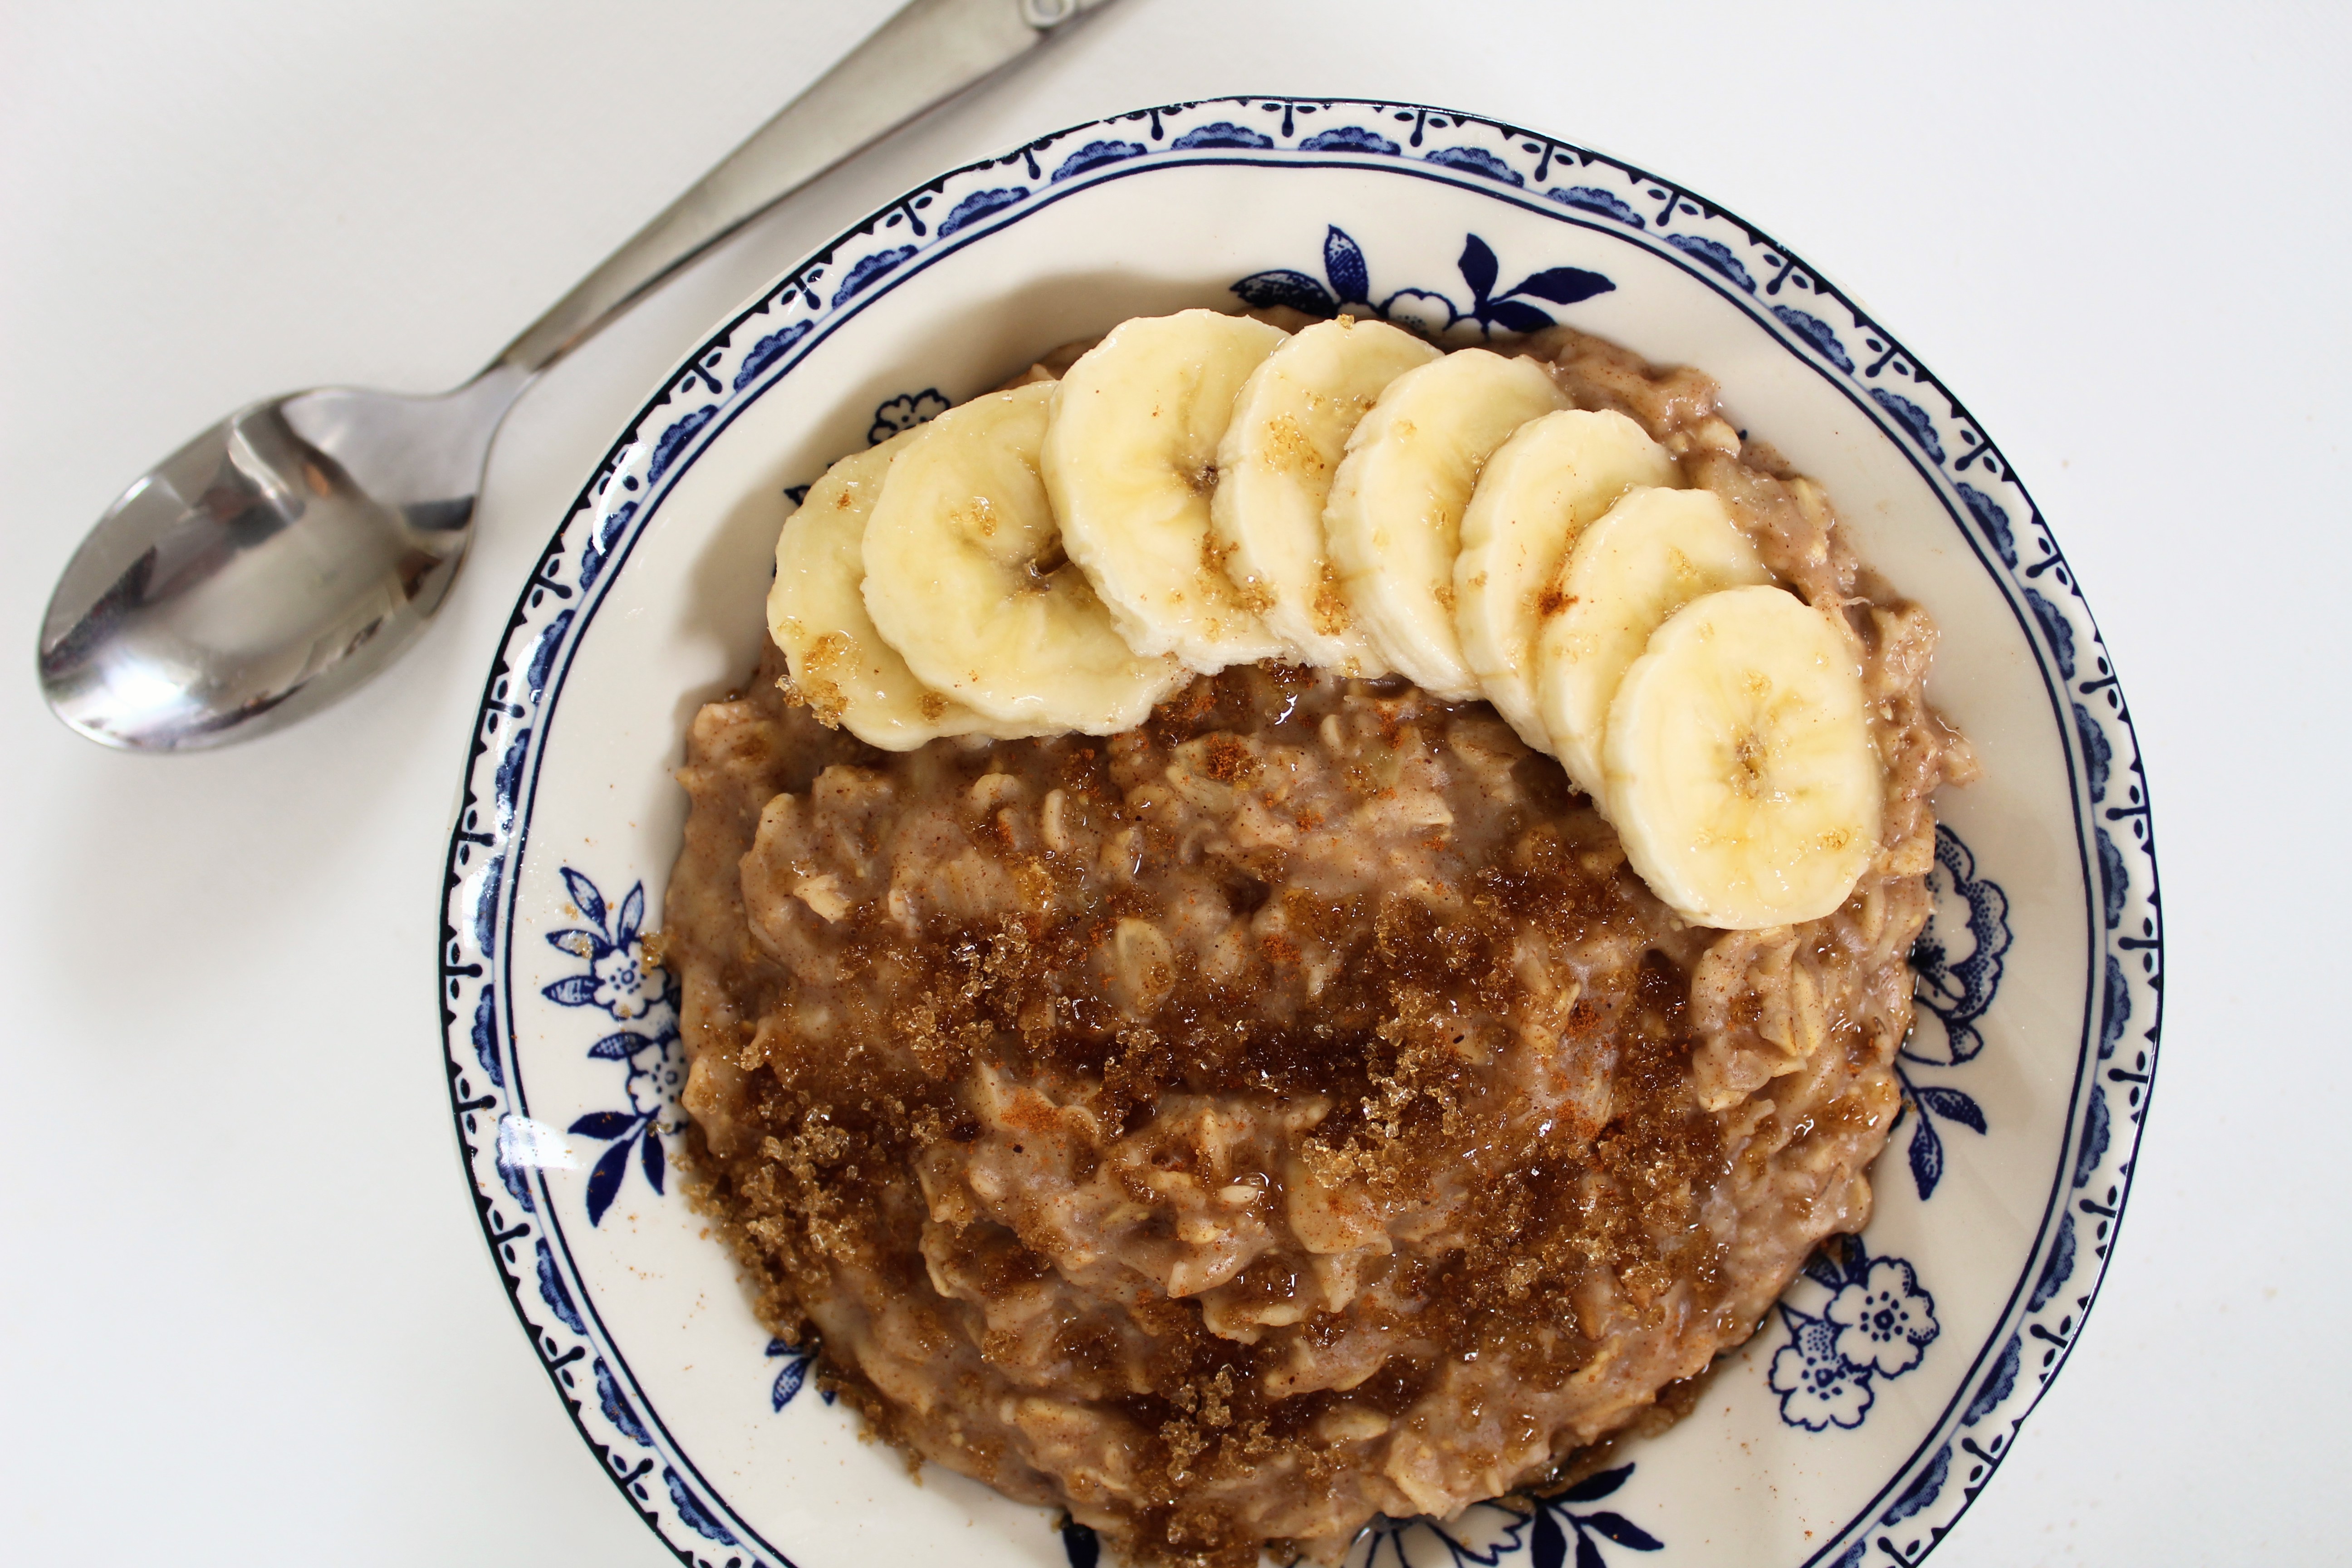 The warm & comforting flavors of banana bread make an easy breakfast in this creamy bowl of low-sugar banana bread oatmeal, topped with sliced bananas, cinnamon, and just a pinch of brown sugar.